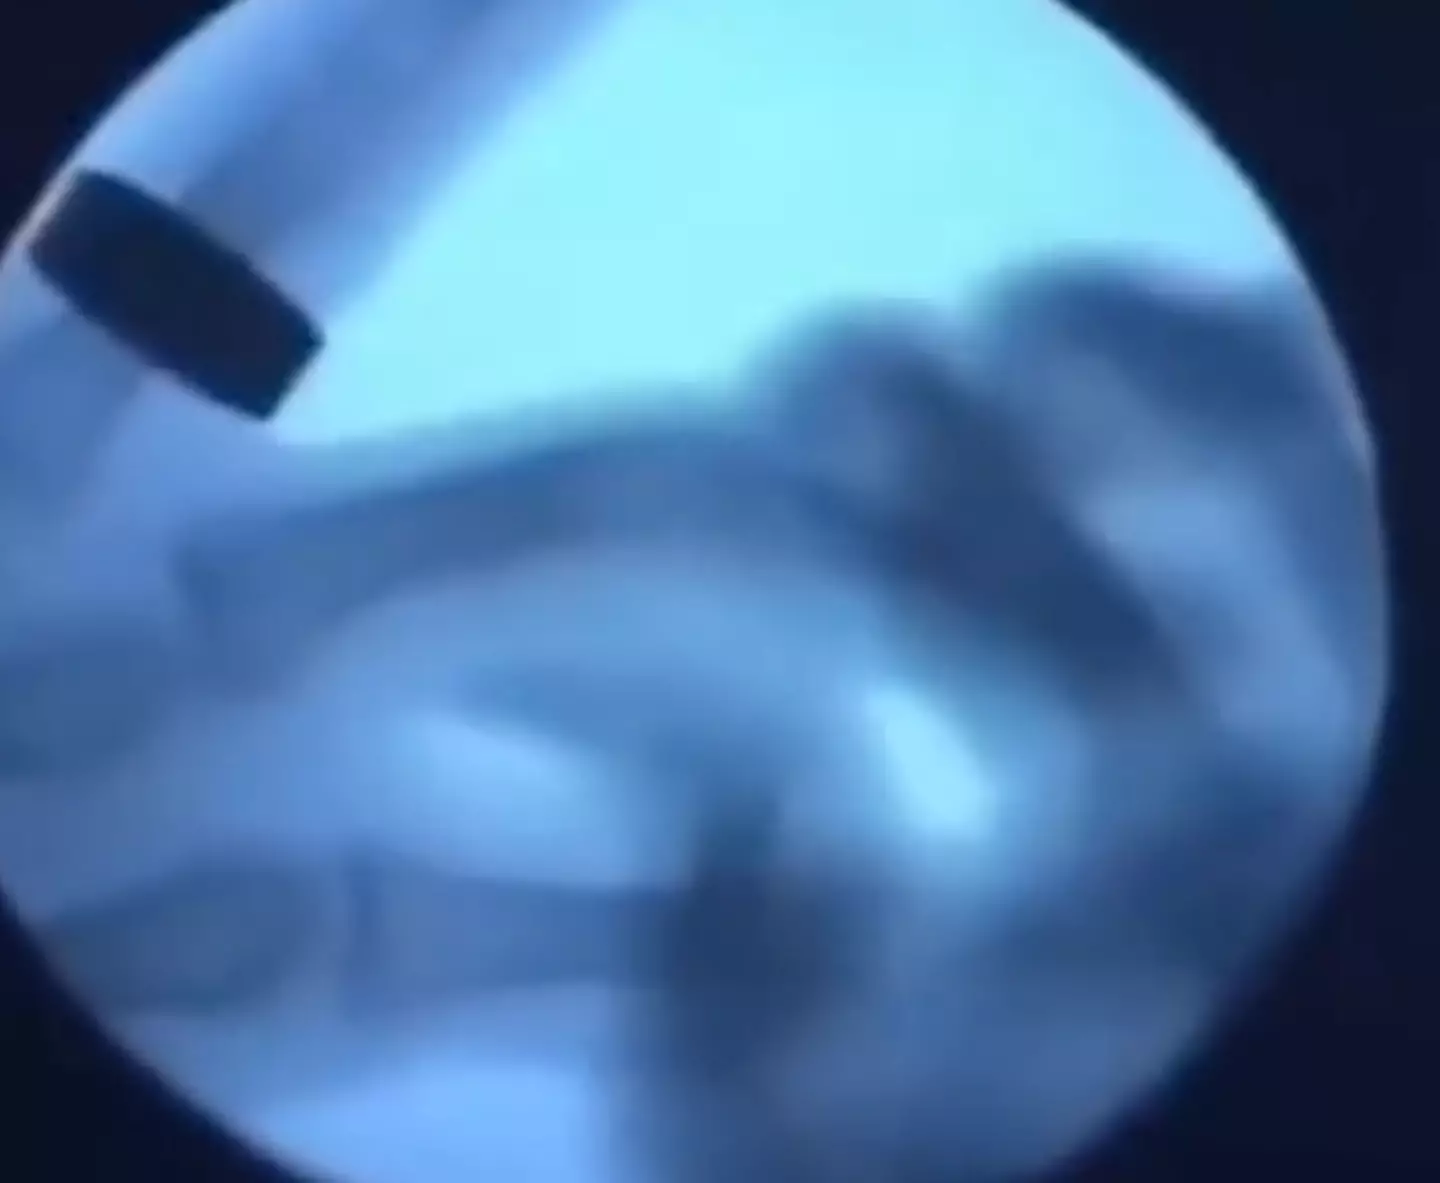 The clip shows an X-ray video of finger knuckles being cracked.